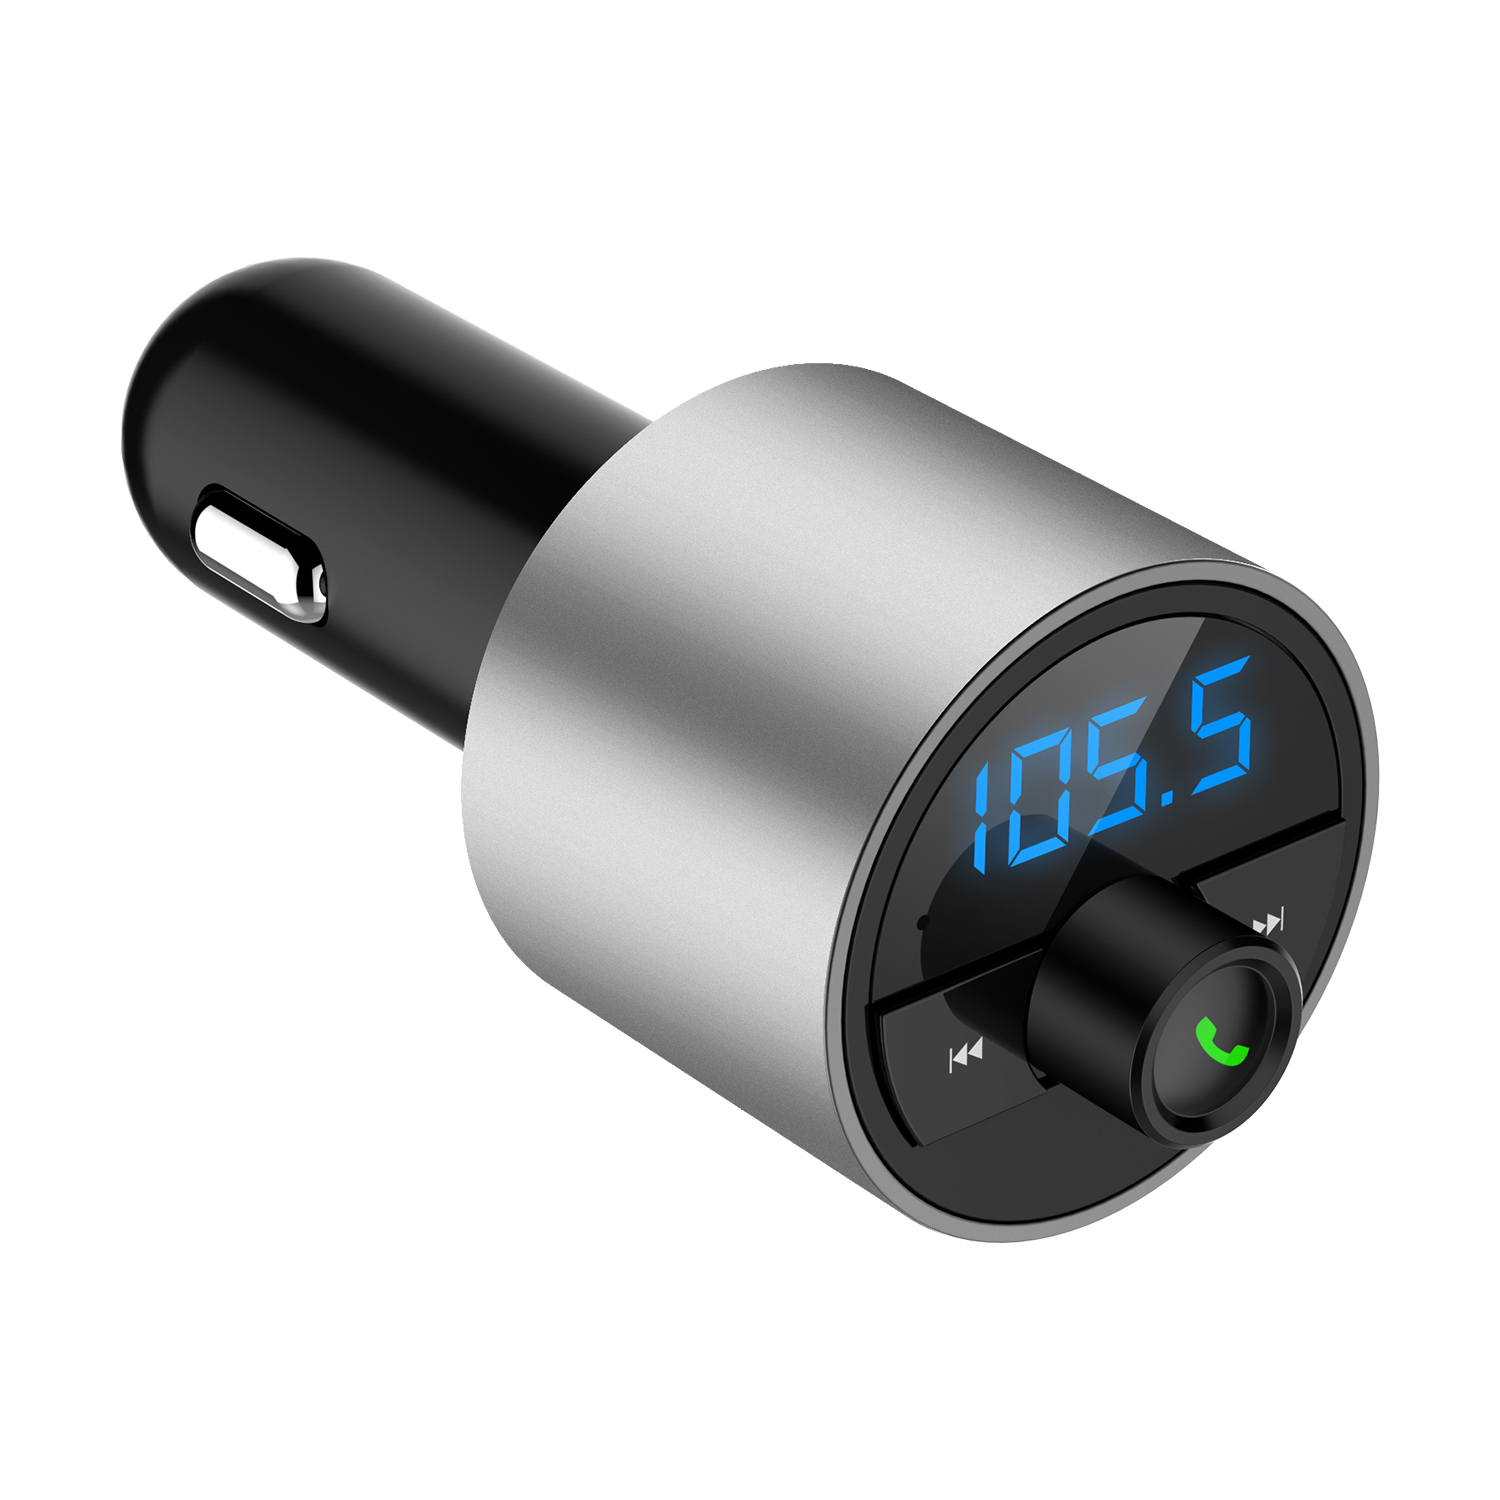 Mini LED Display Dual USB bluetooth Hands-free Smart Quick Wireless 3.6A Car Charger with Microphone 2